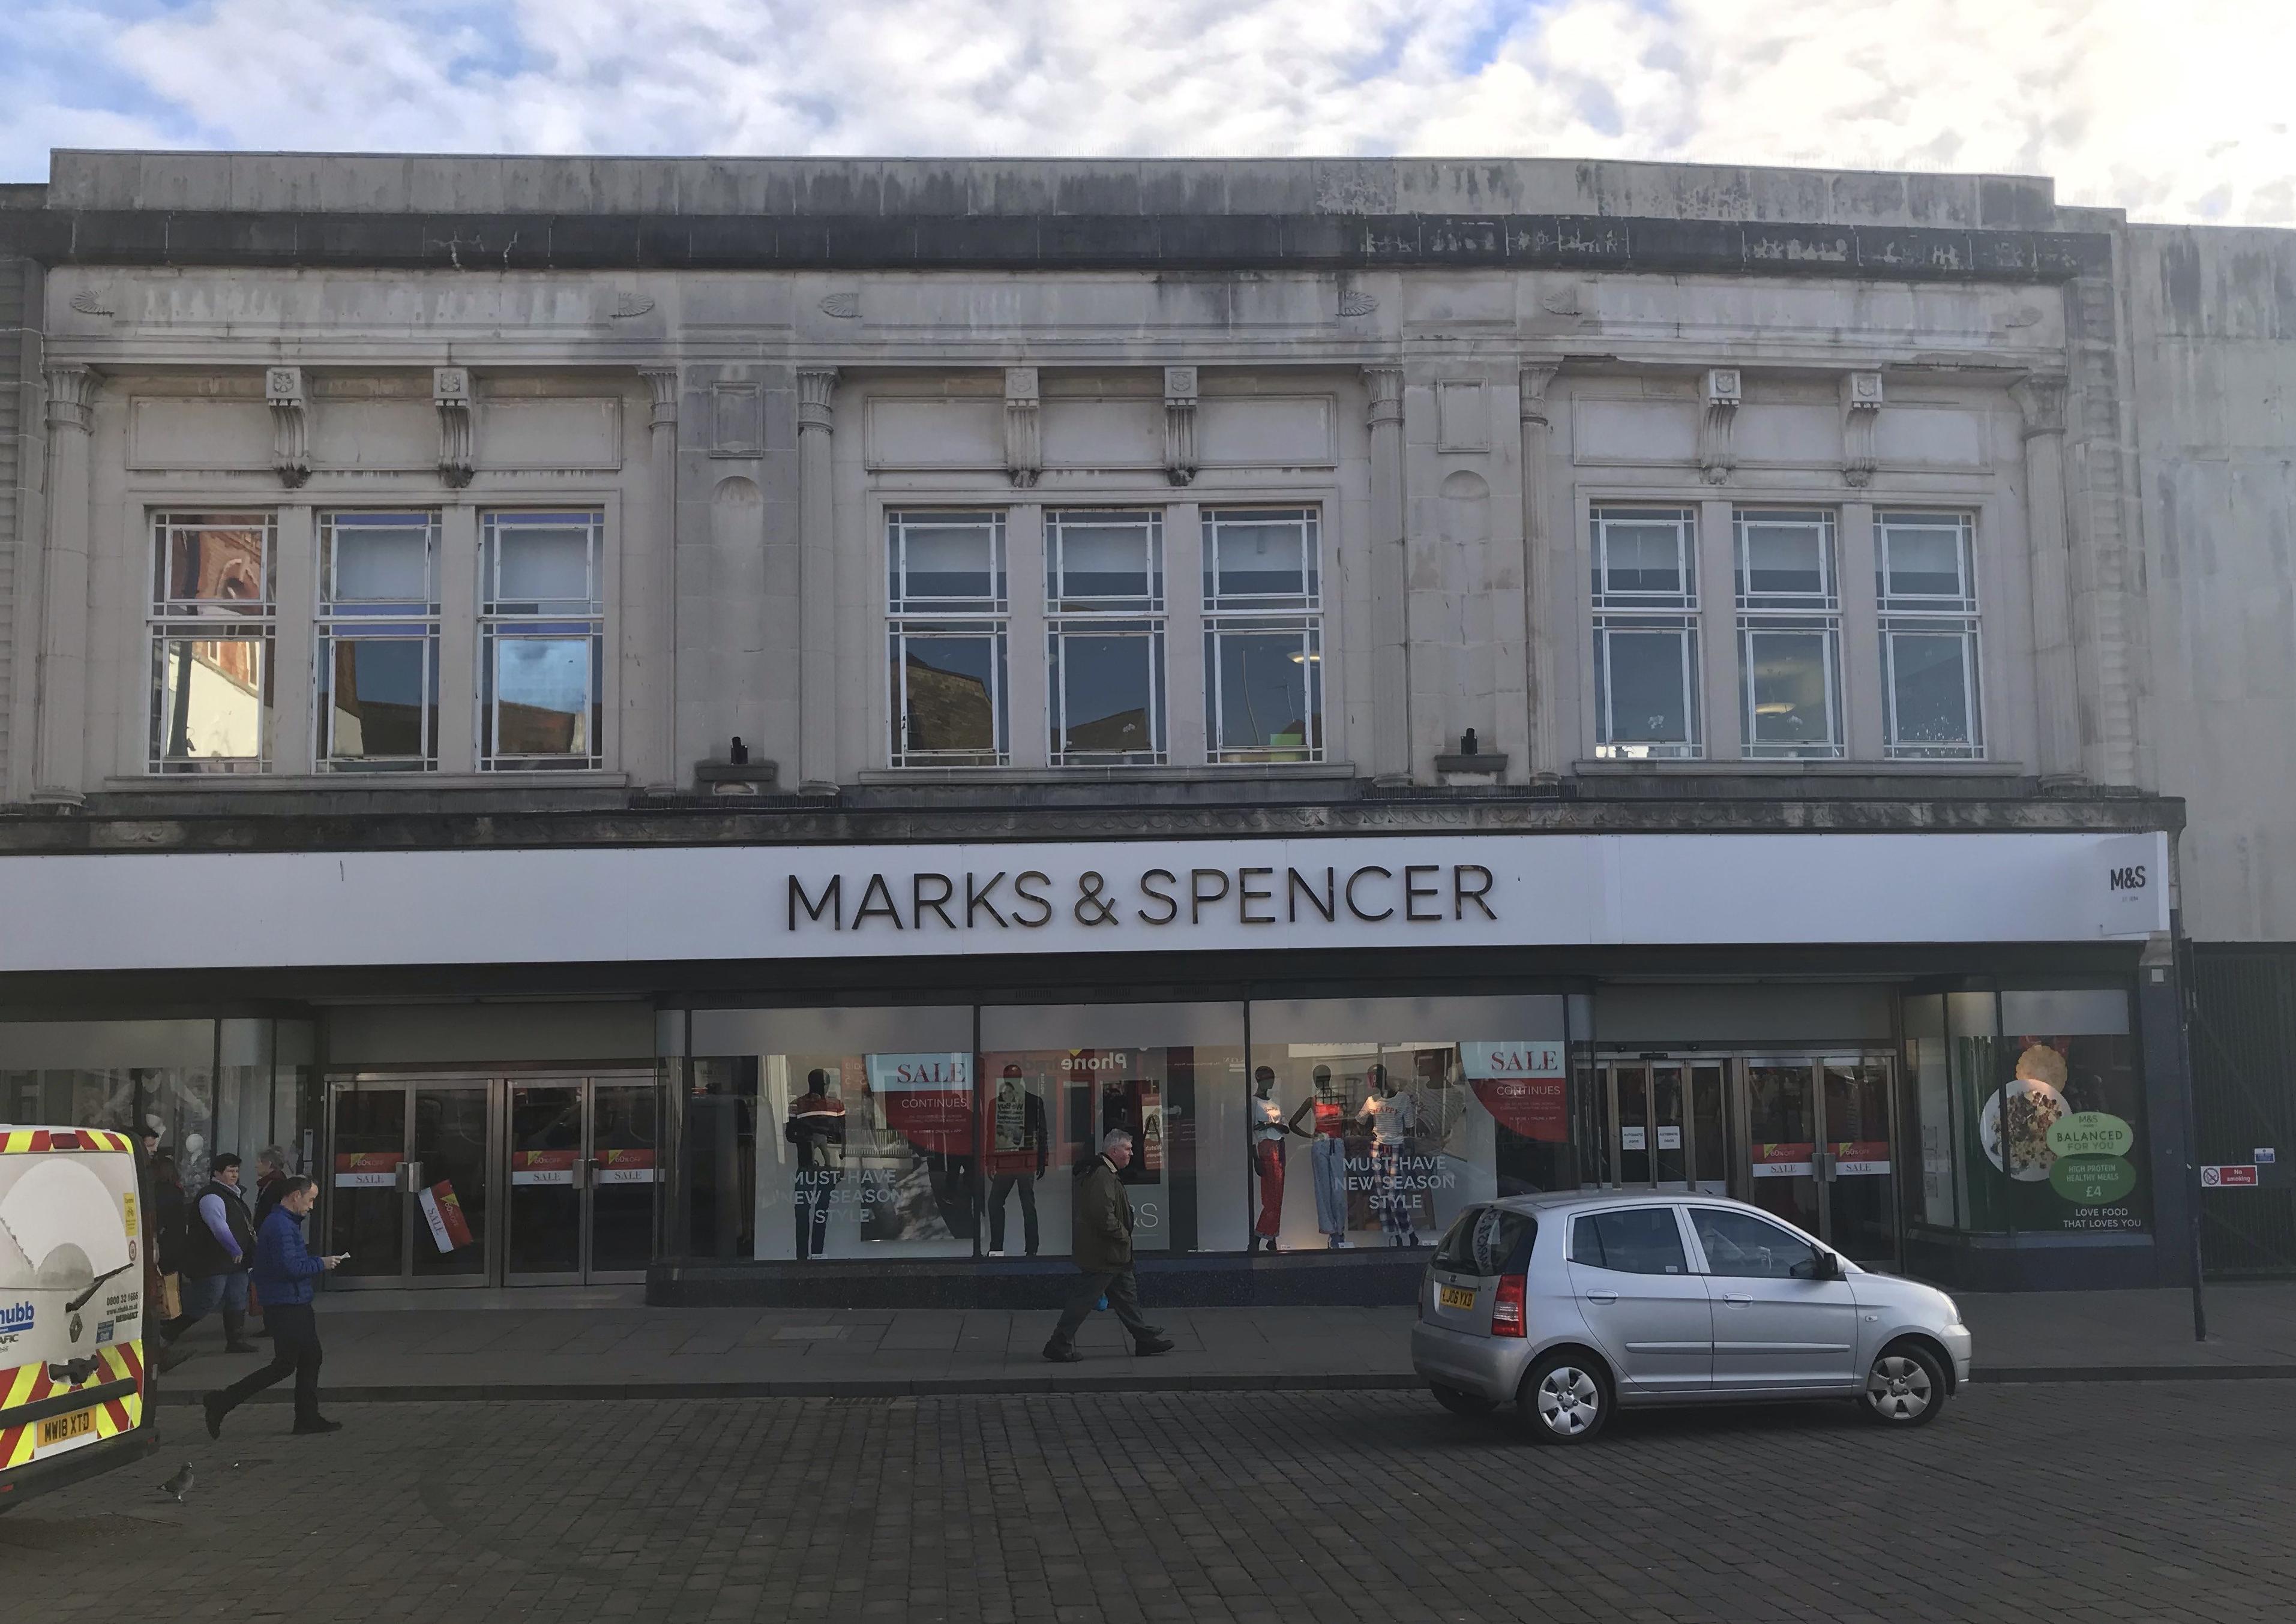 More than 100 years' history in Boston came to an end when Marks & Spencer closed its Market Place store. A number of high street names have left the town, but HMV bucked the trend by coming back - re-opening in its old unit.